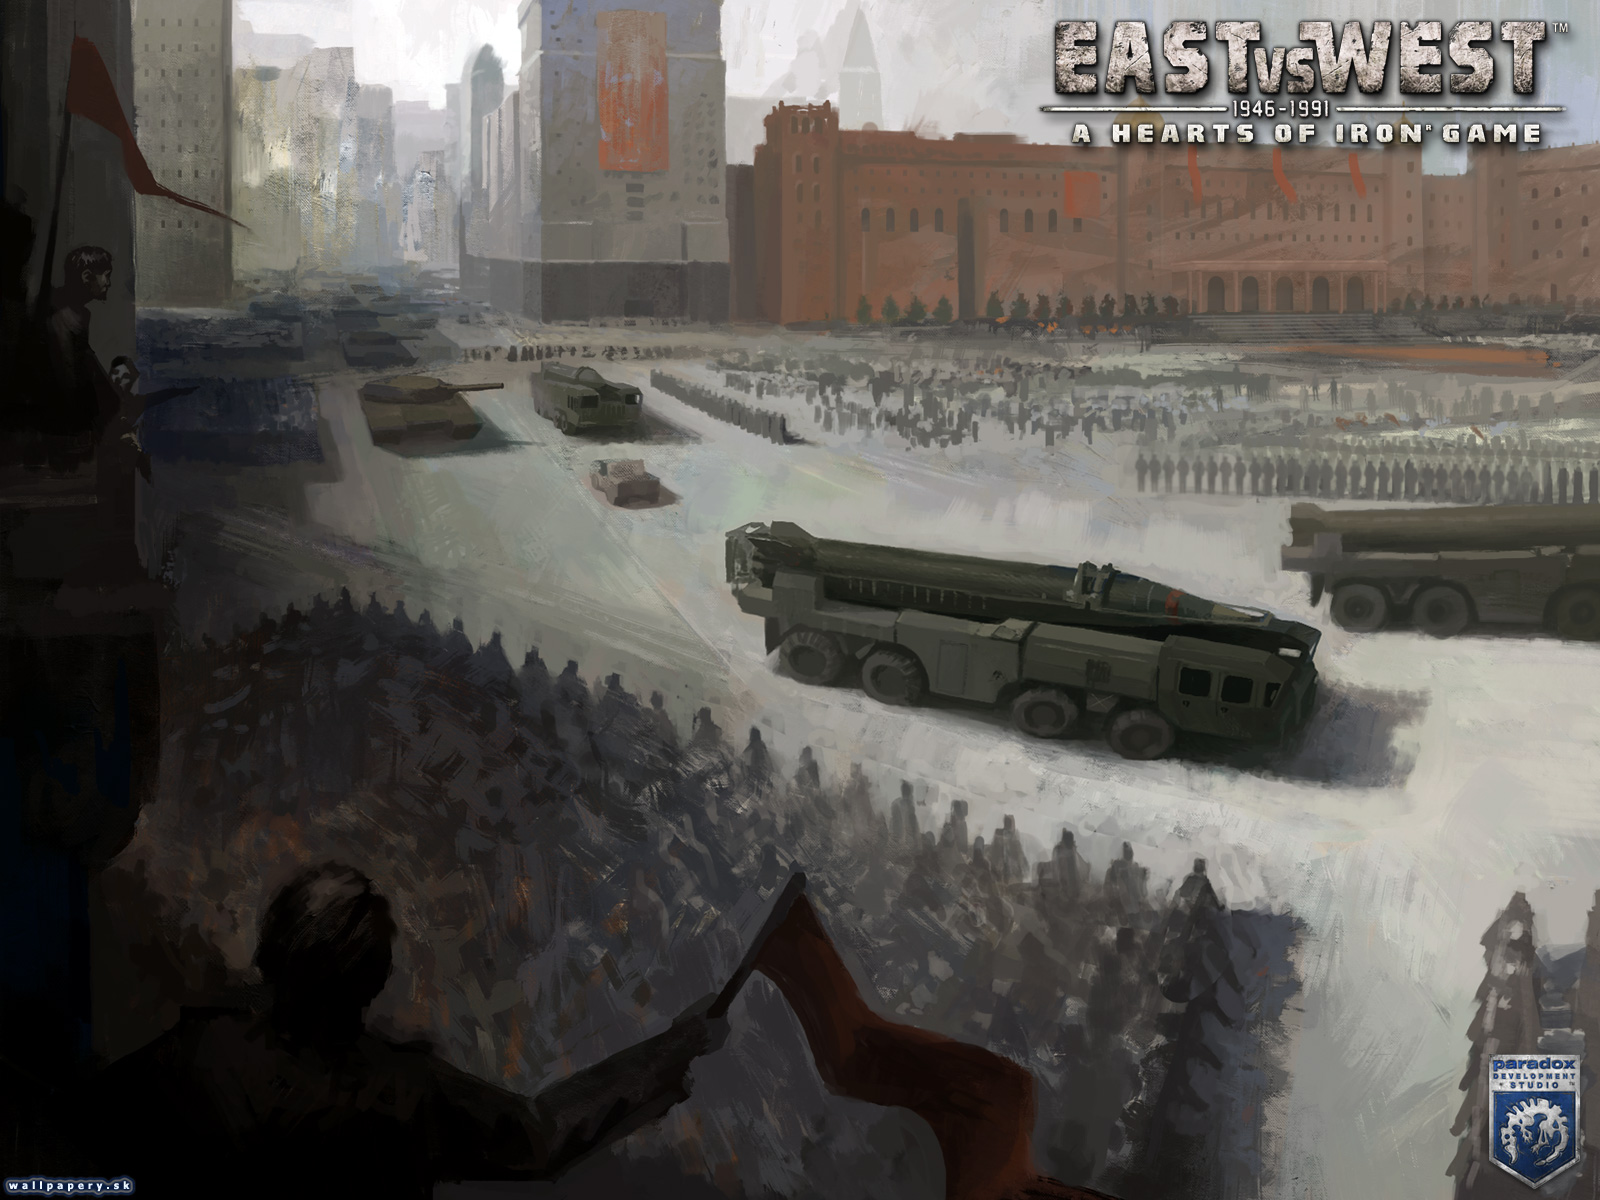 East vs. West: A Hearts of Iron Game - wallpaper 1